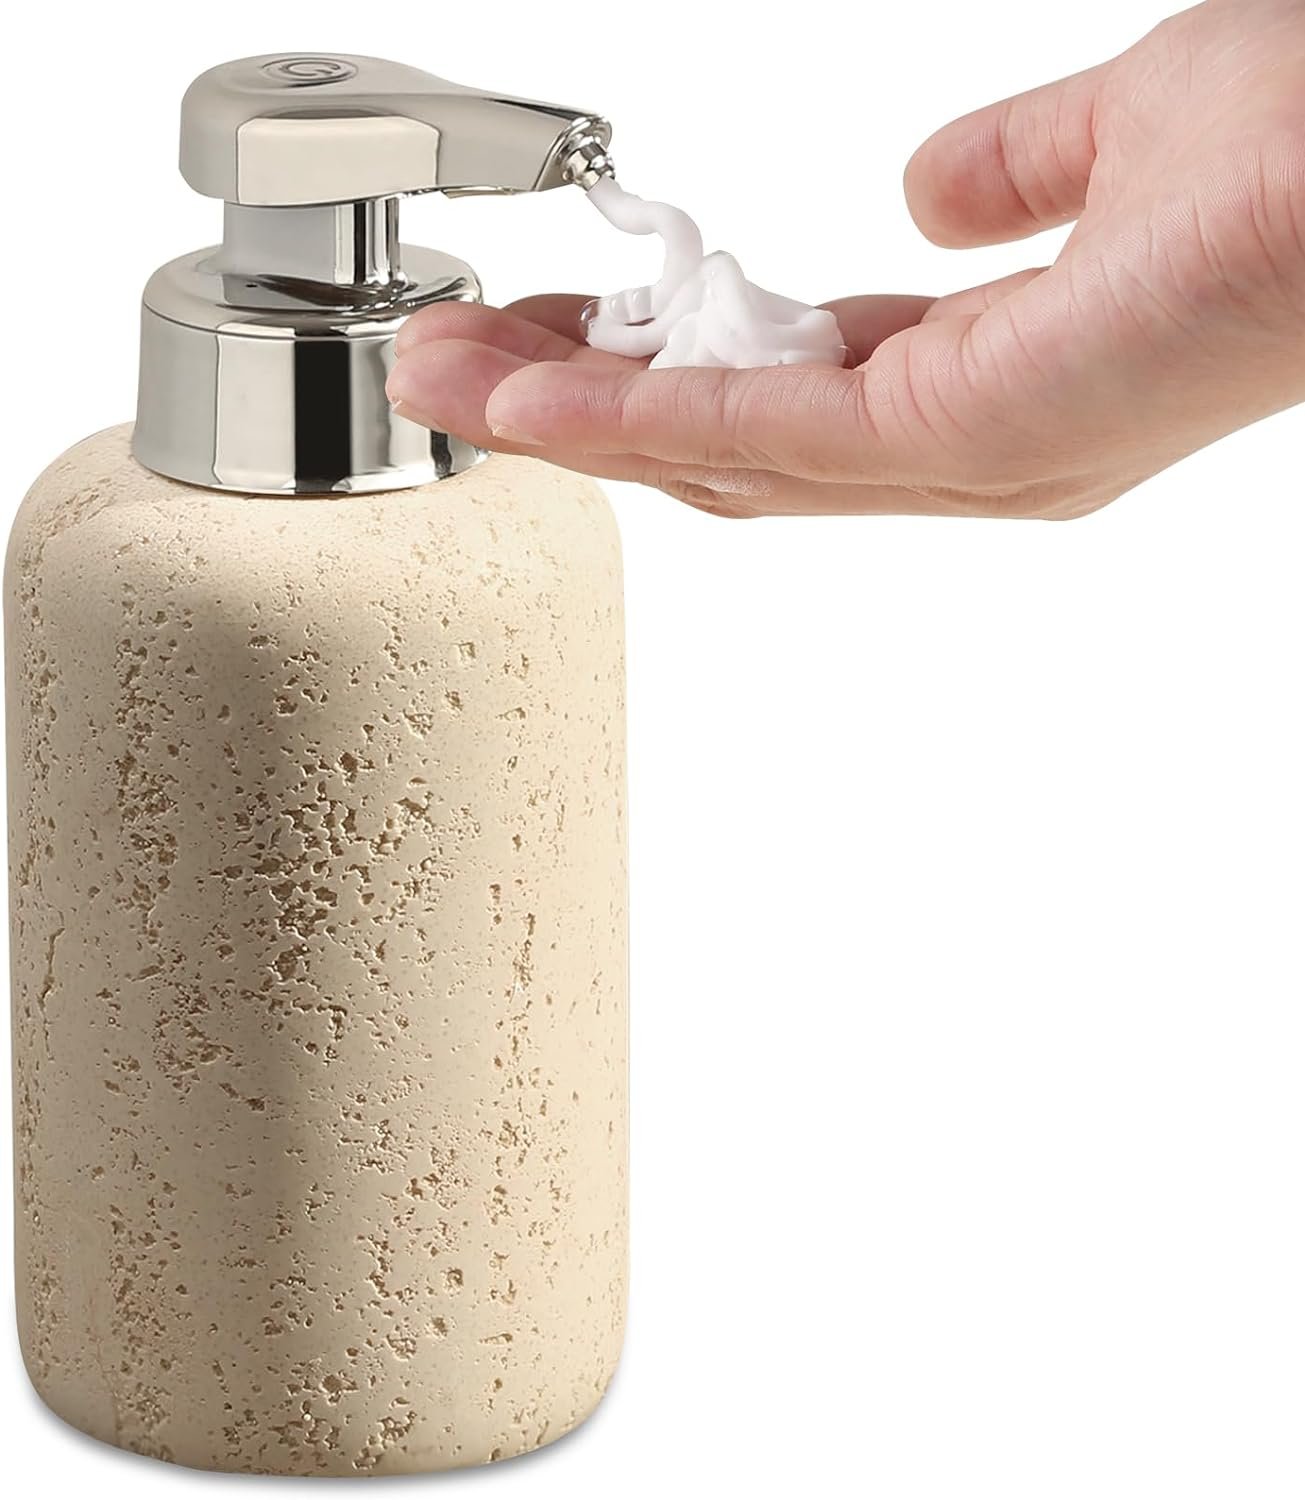 travertine-bathroom-soap-dispenser-natural-beige-marble-travertine-reusable-liquid-dispenser-lotion-and-soap-container-with-golden-press-head-soap-bottle